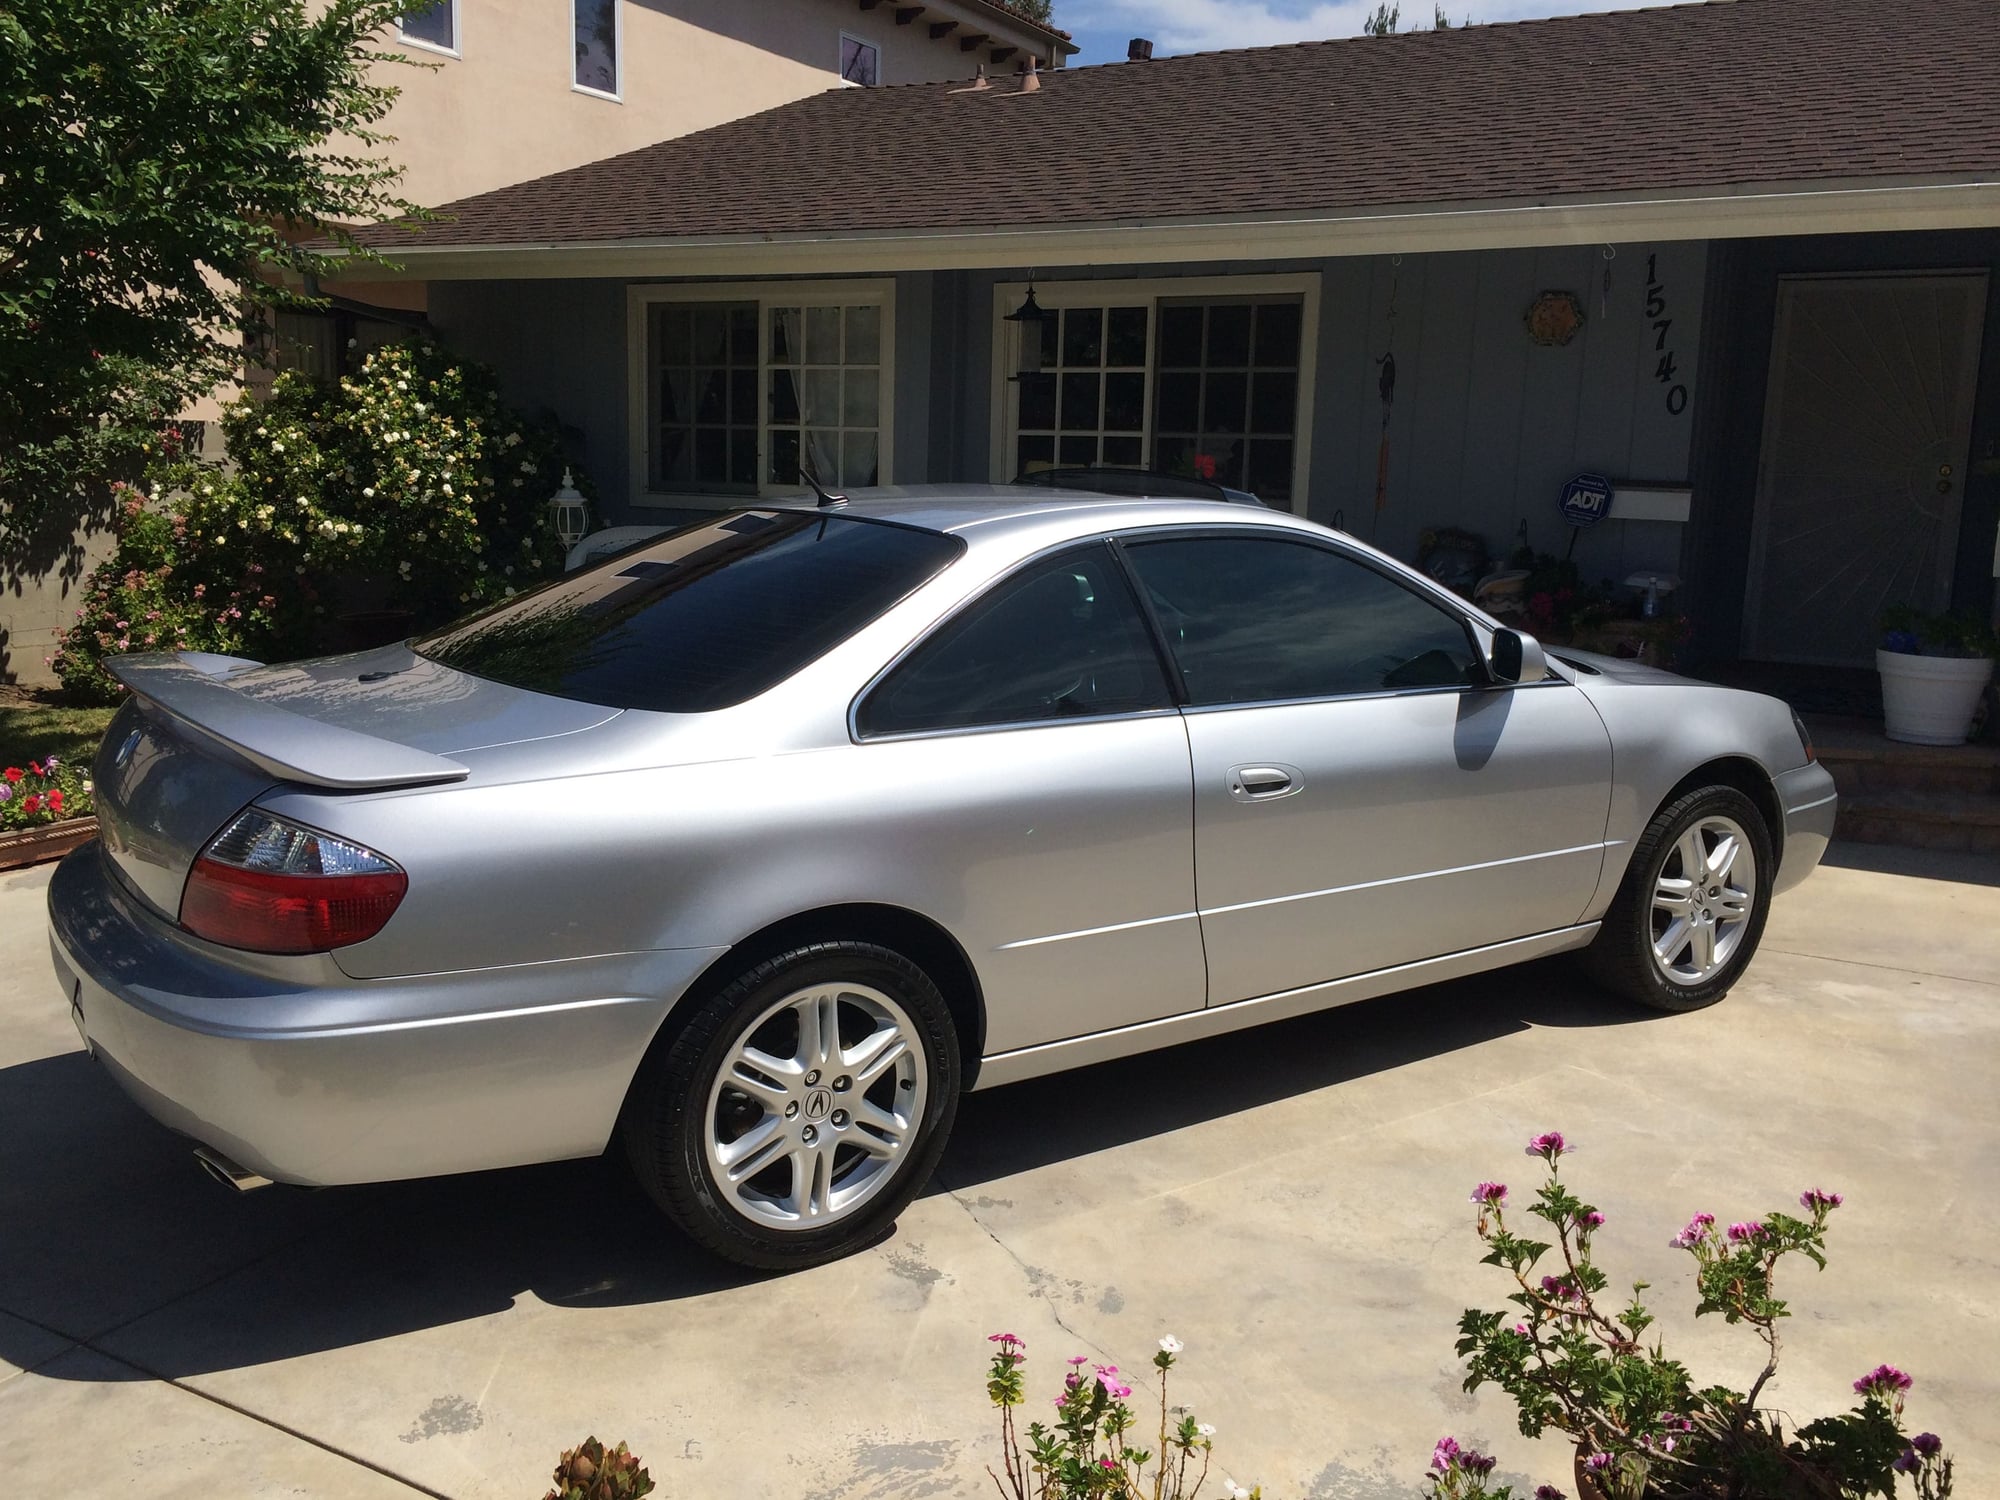 2003 Acura CL - FS: Cherry condition 2003 Acura CL Type S with Navi - Used - VIN 1acu32ra123457887 - 145,000 Miles - 6 cyl - 2WD - Automatic - Coupe - Silver - Beaumont, CA 92223, United States